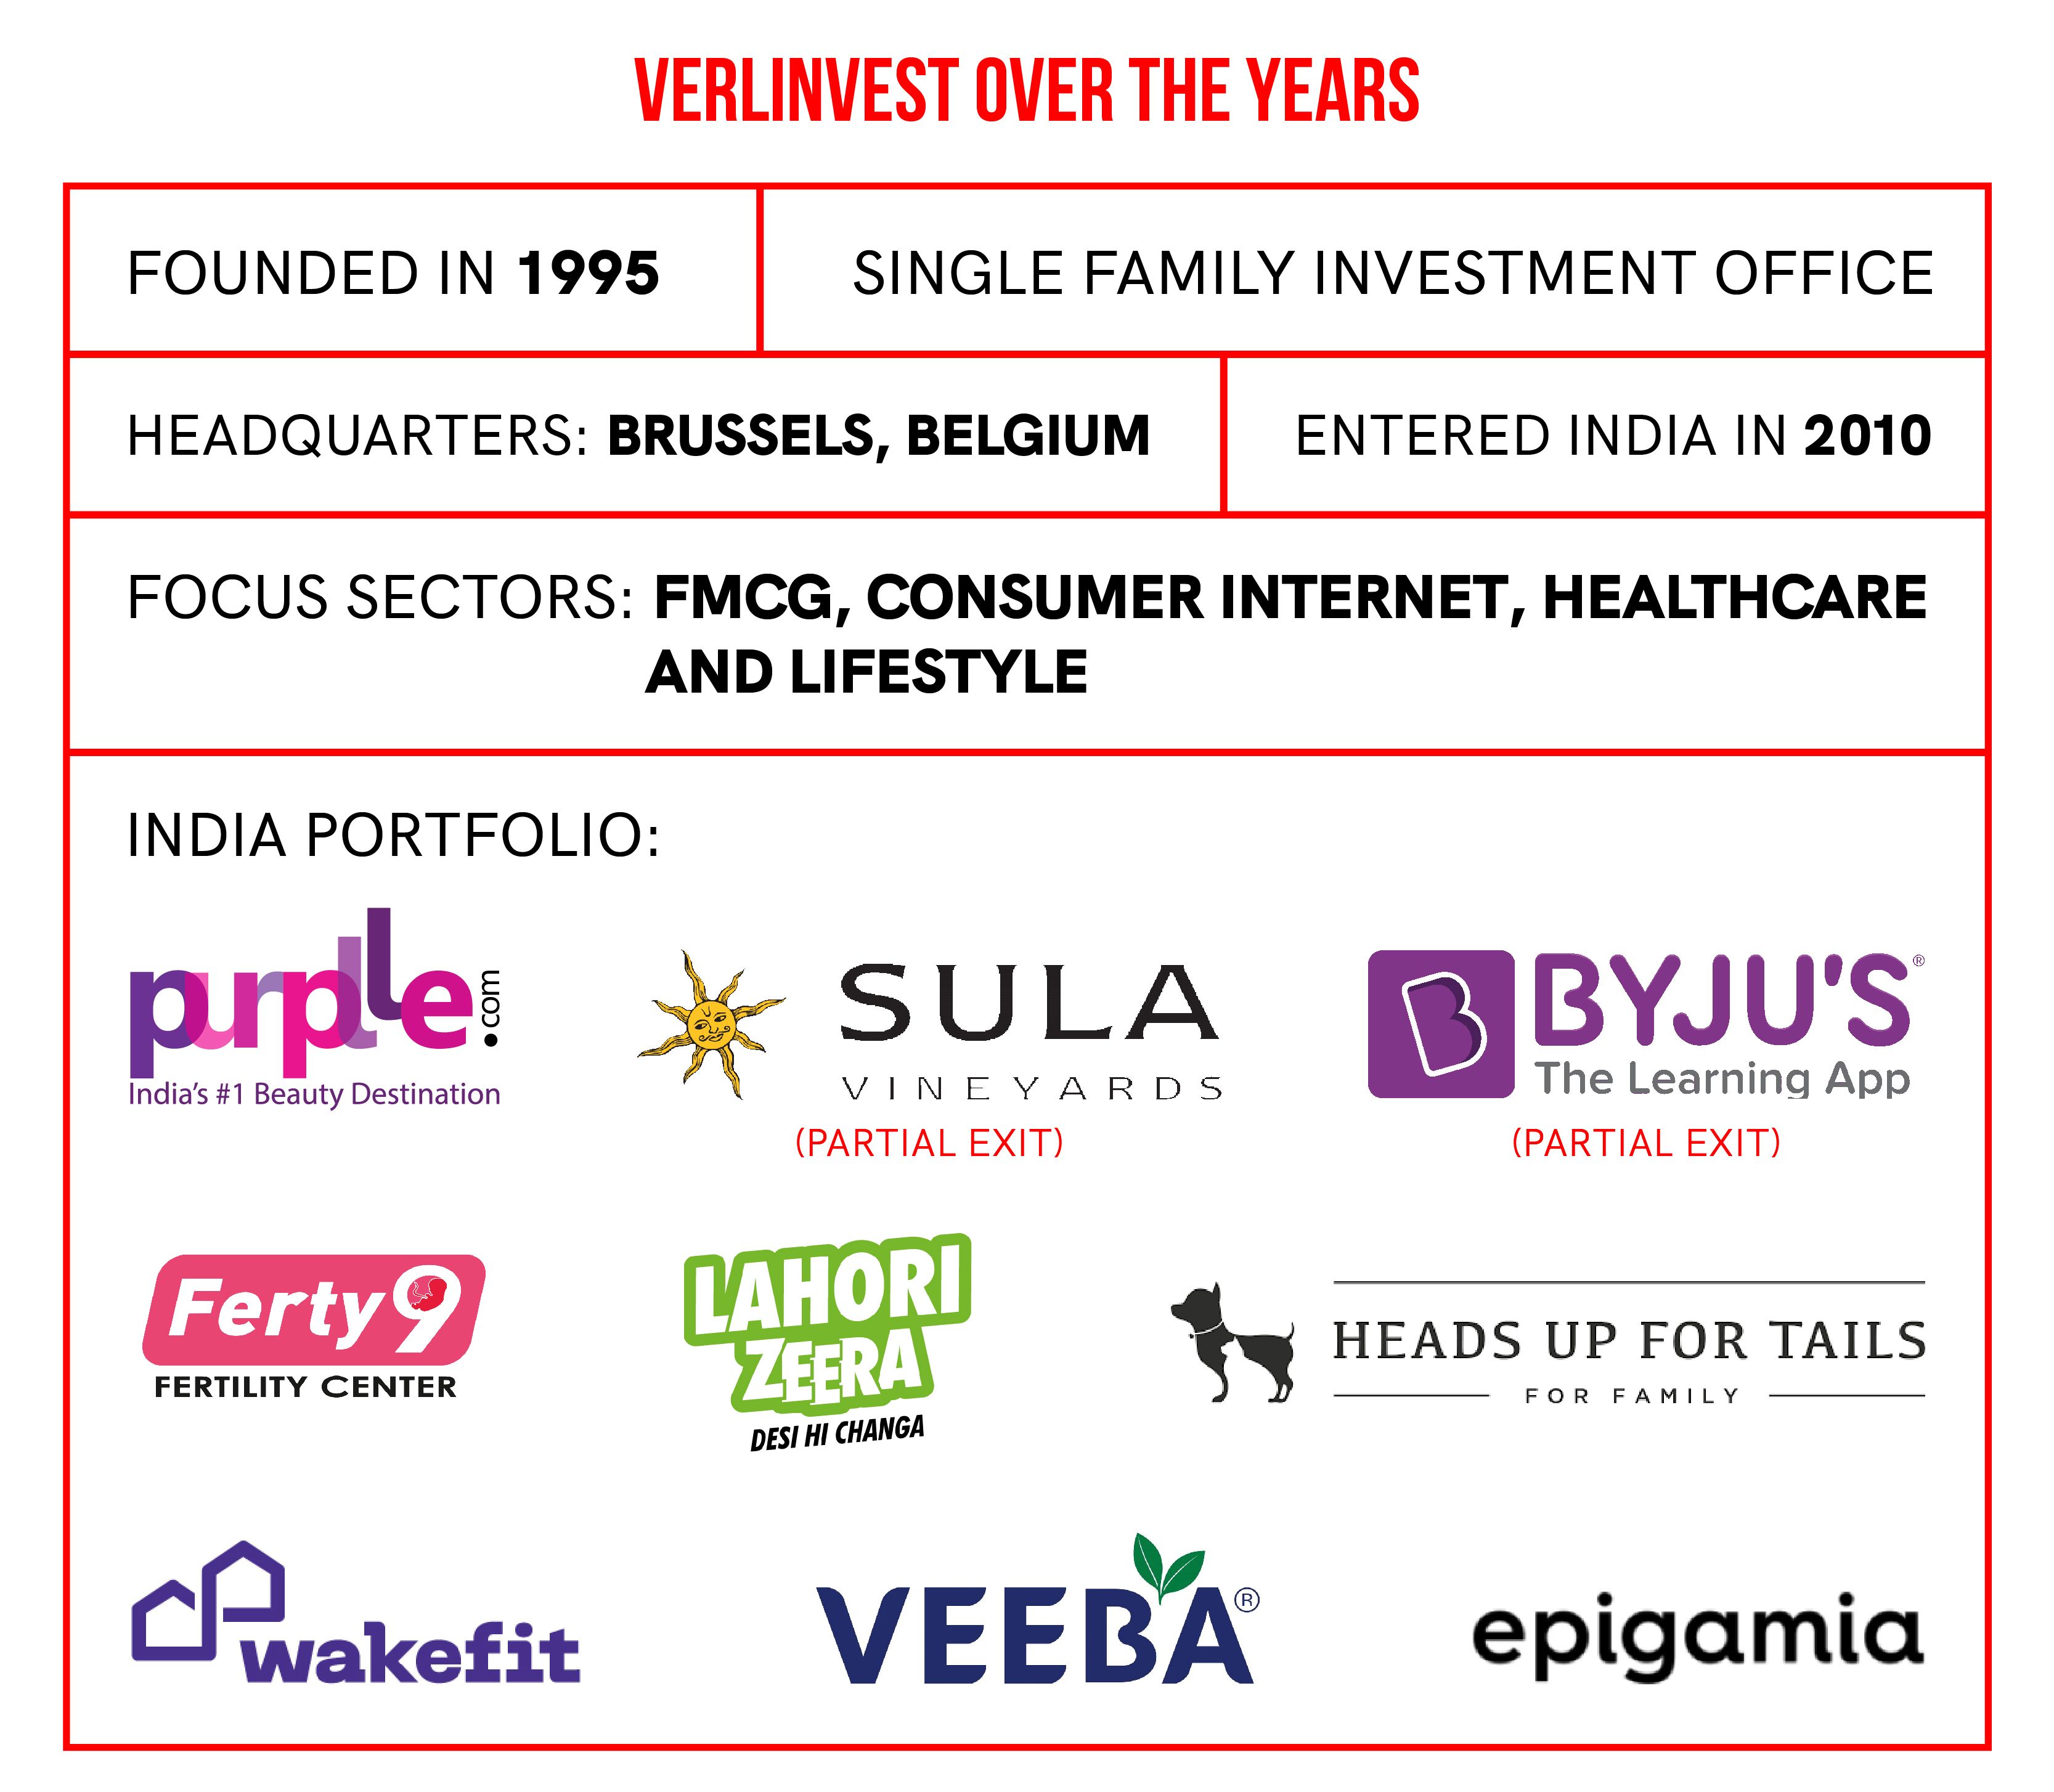 Verlinvest infographic